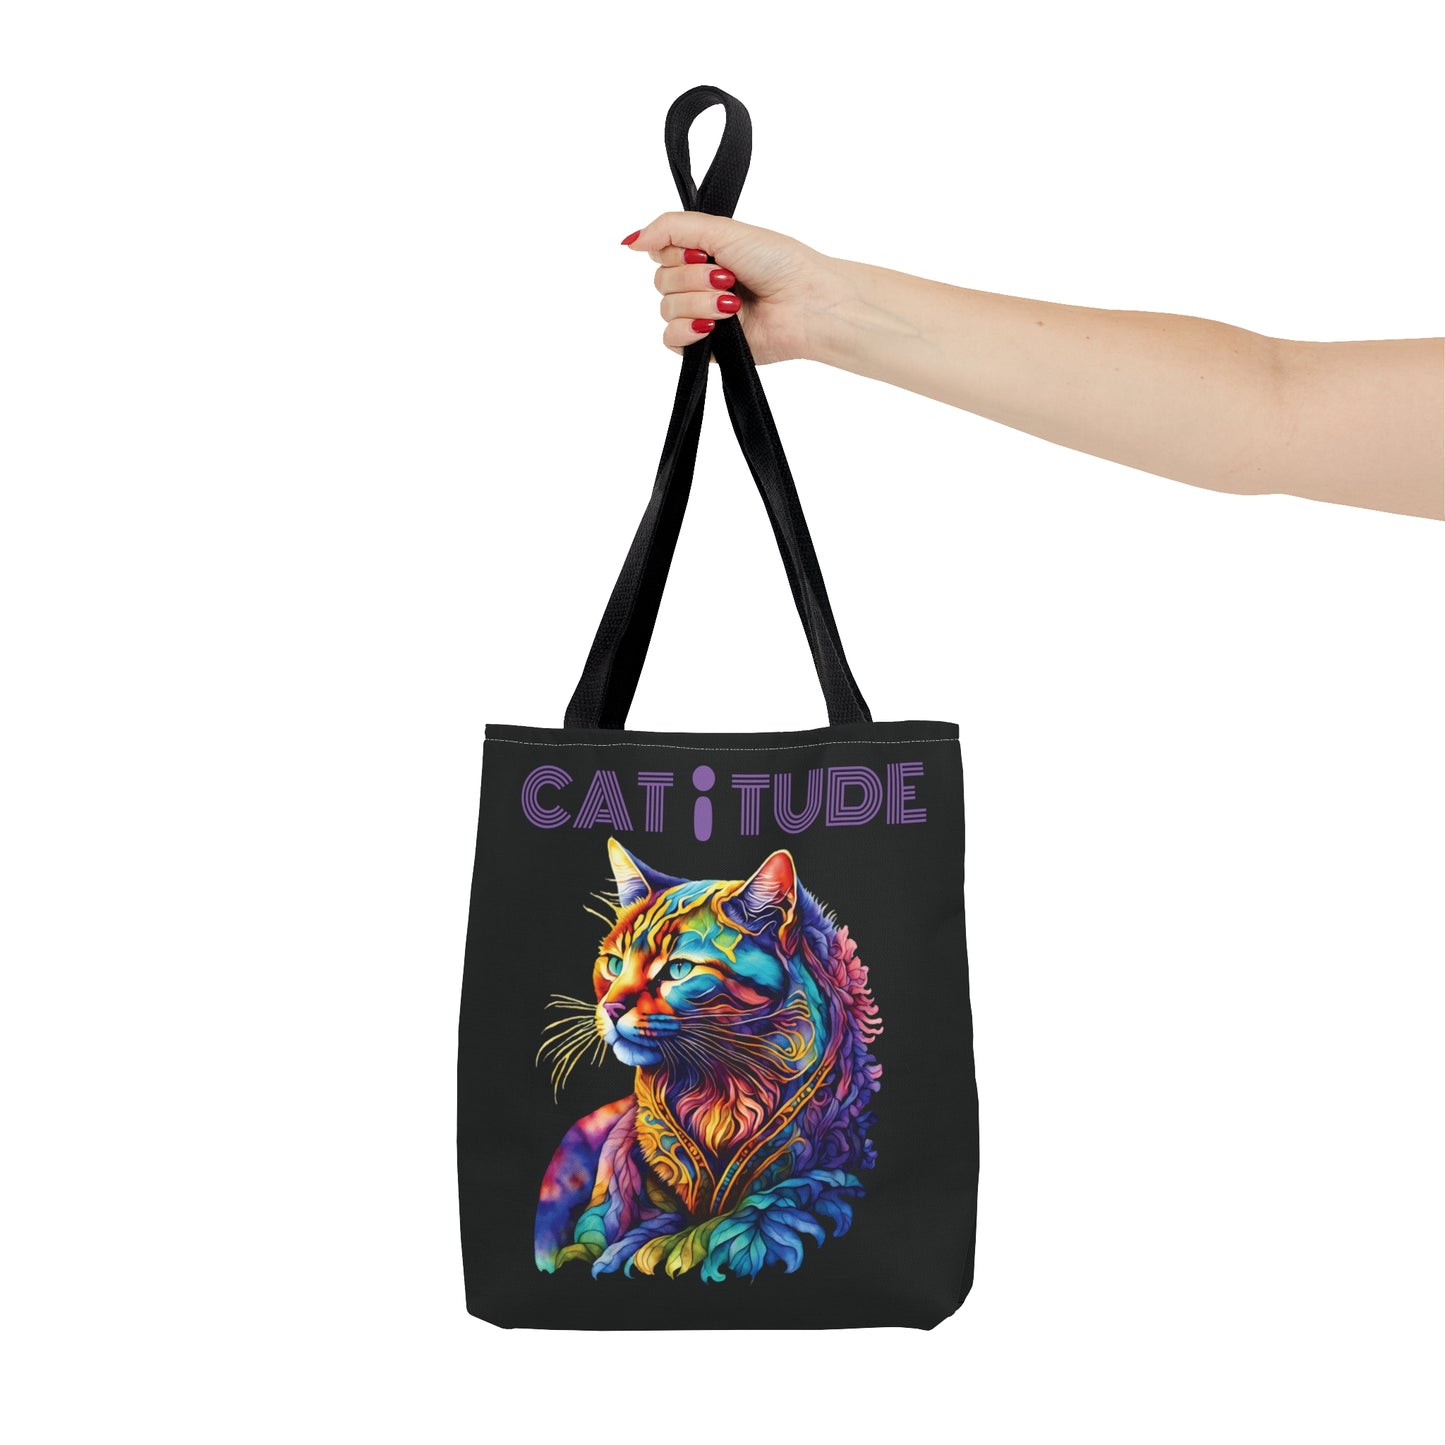 CAT-i-TUDE & Look For BEAUTY (back) BLACK Tote Bag - Perfect Gift For Watercolor & Cat Lovers